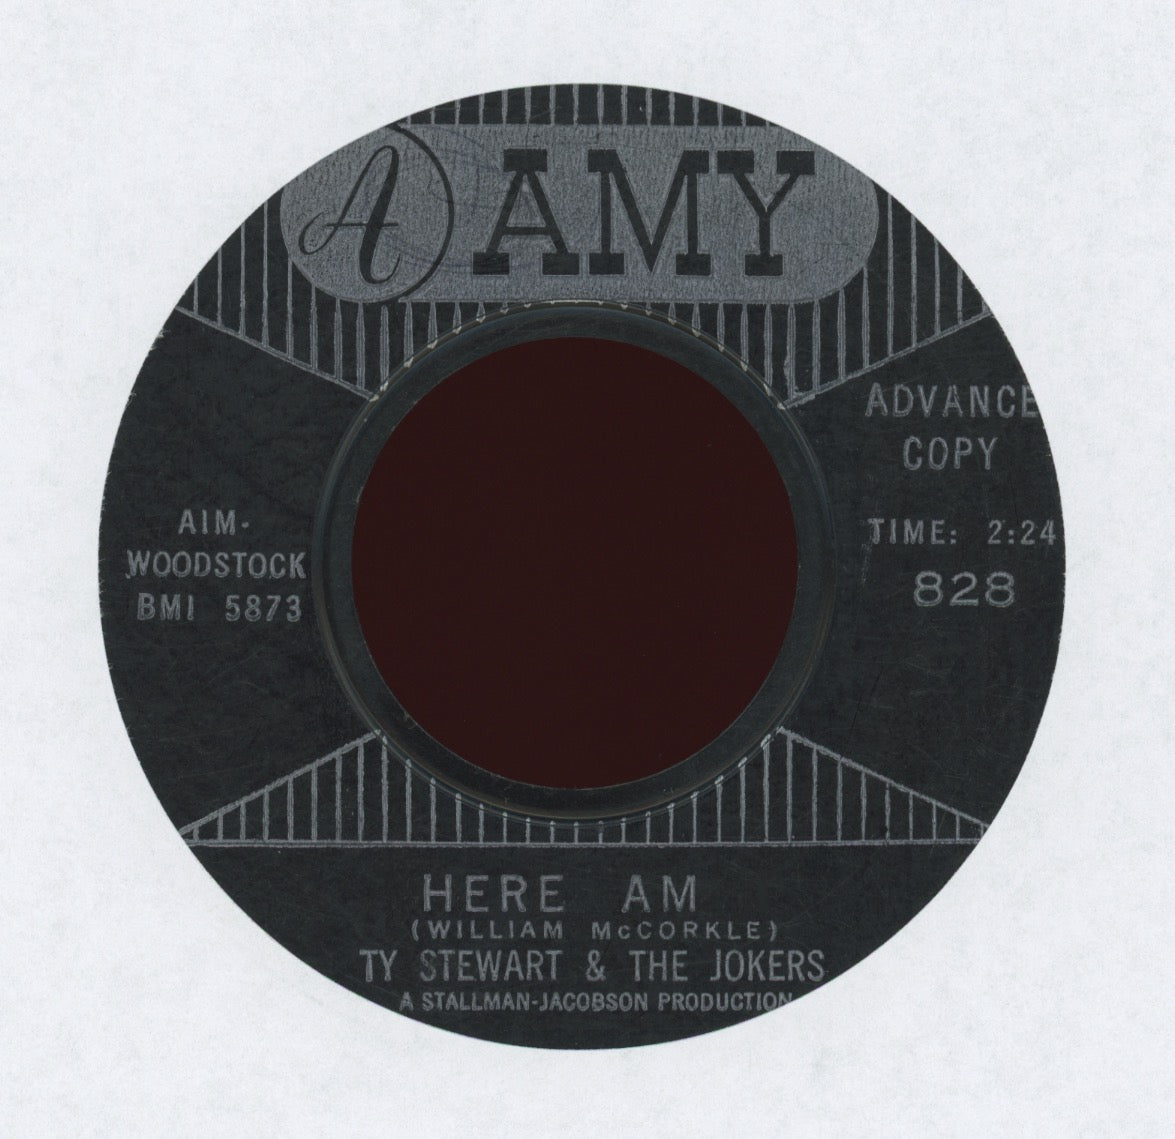 Ty Stewart & The Jokers - Here Am I on Amy Promo